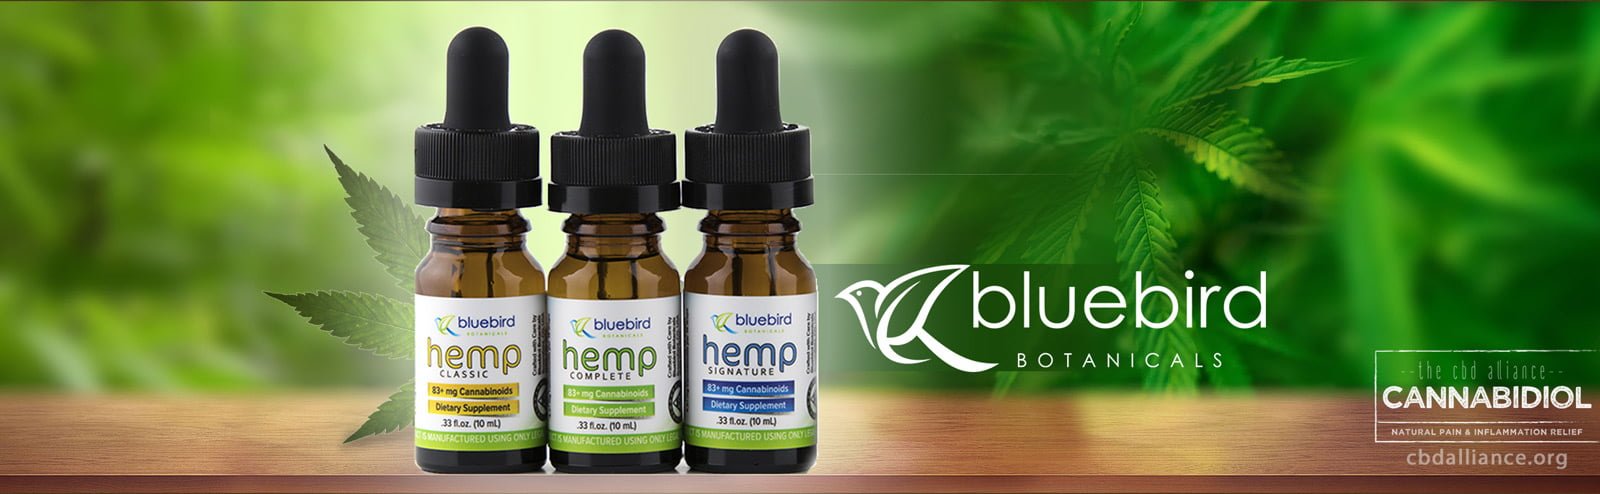 Bluebird Botanicals Takes The Lead In Reliable CBD Products